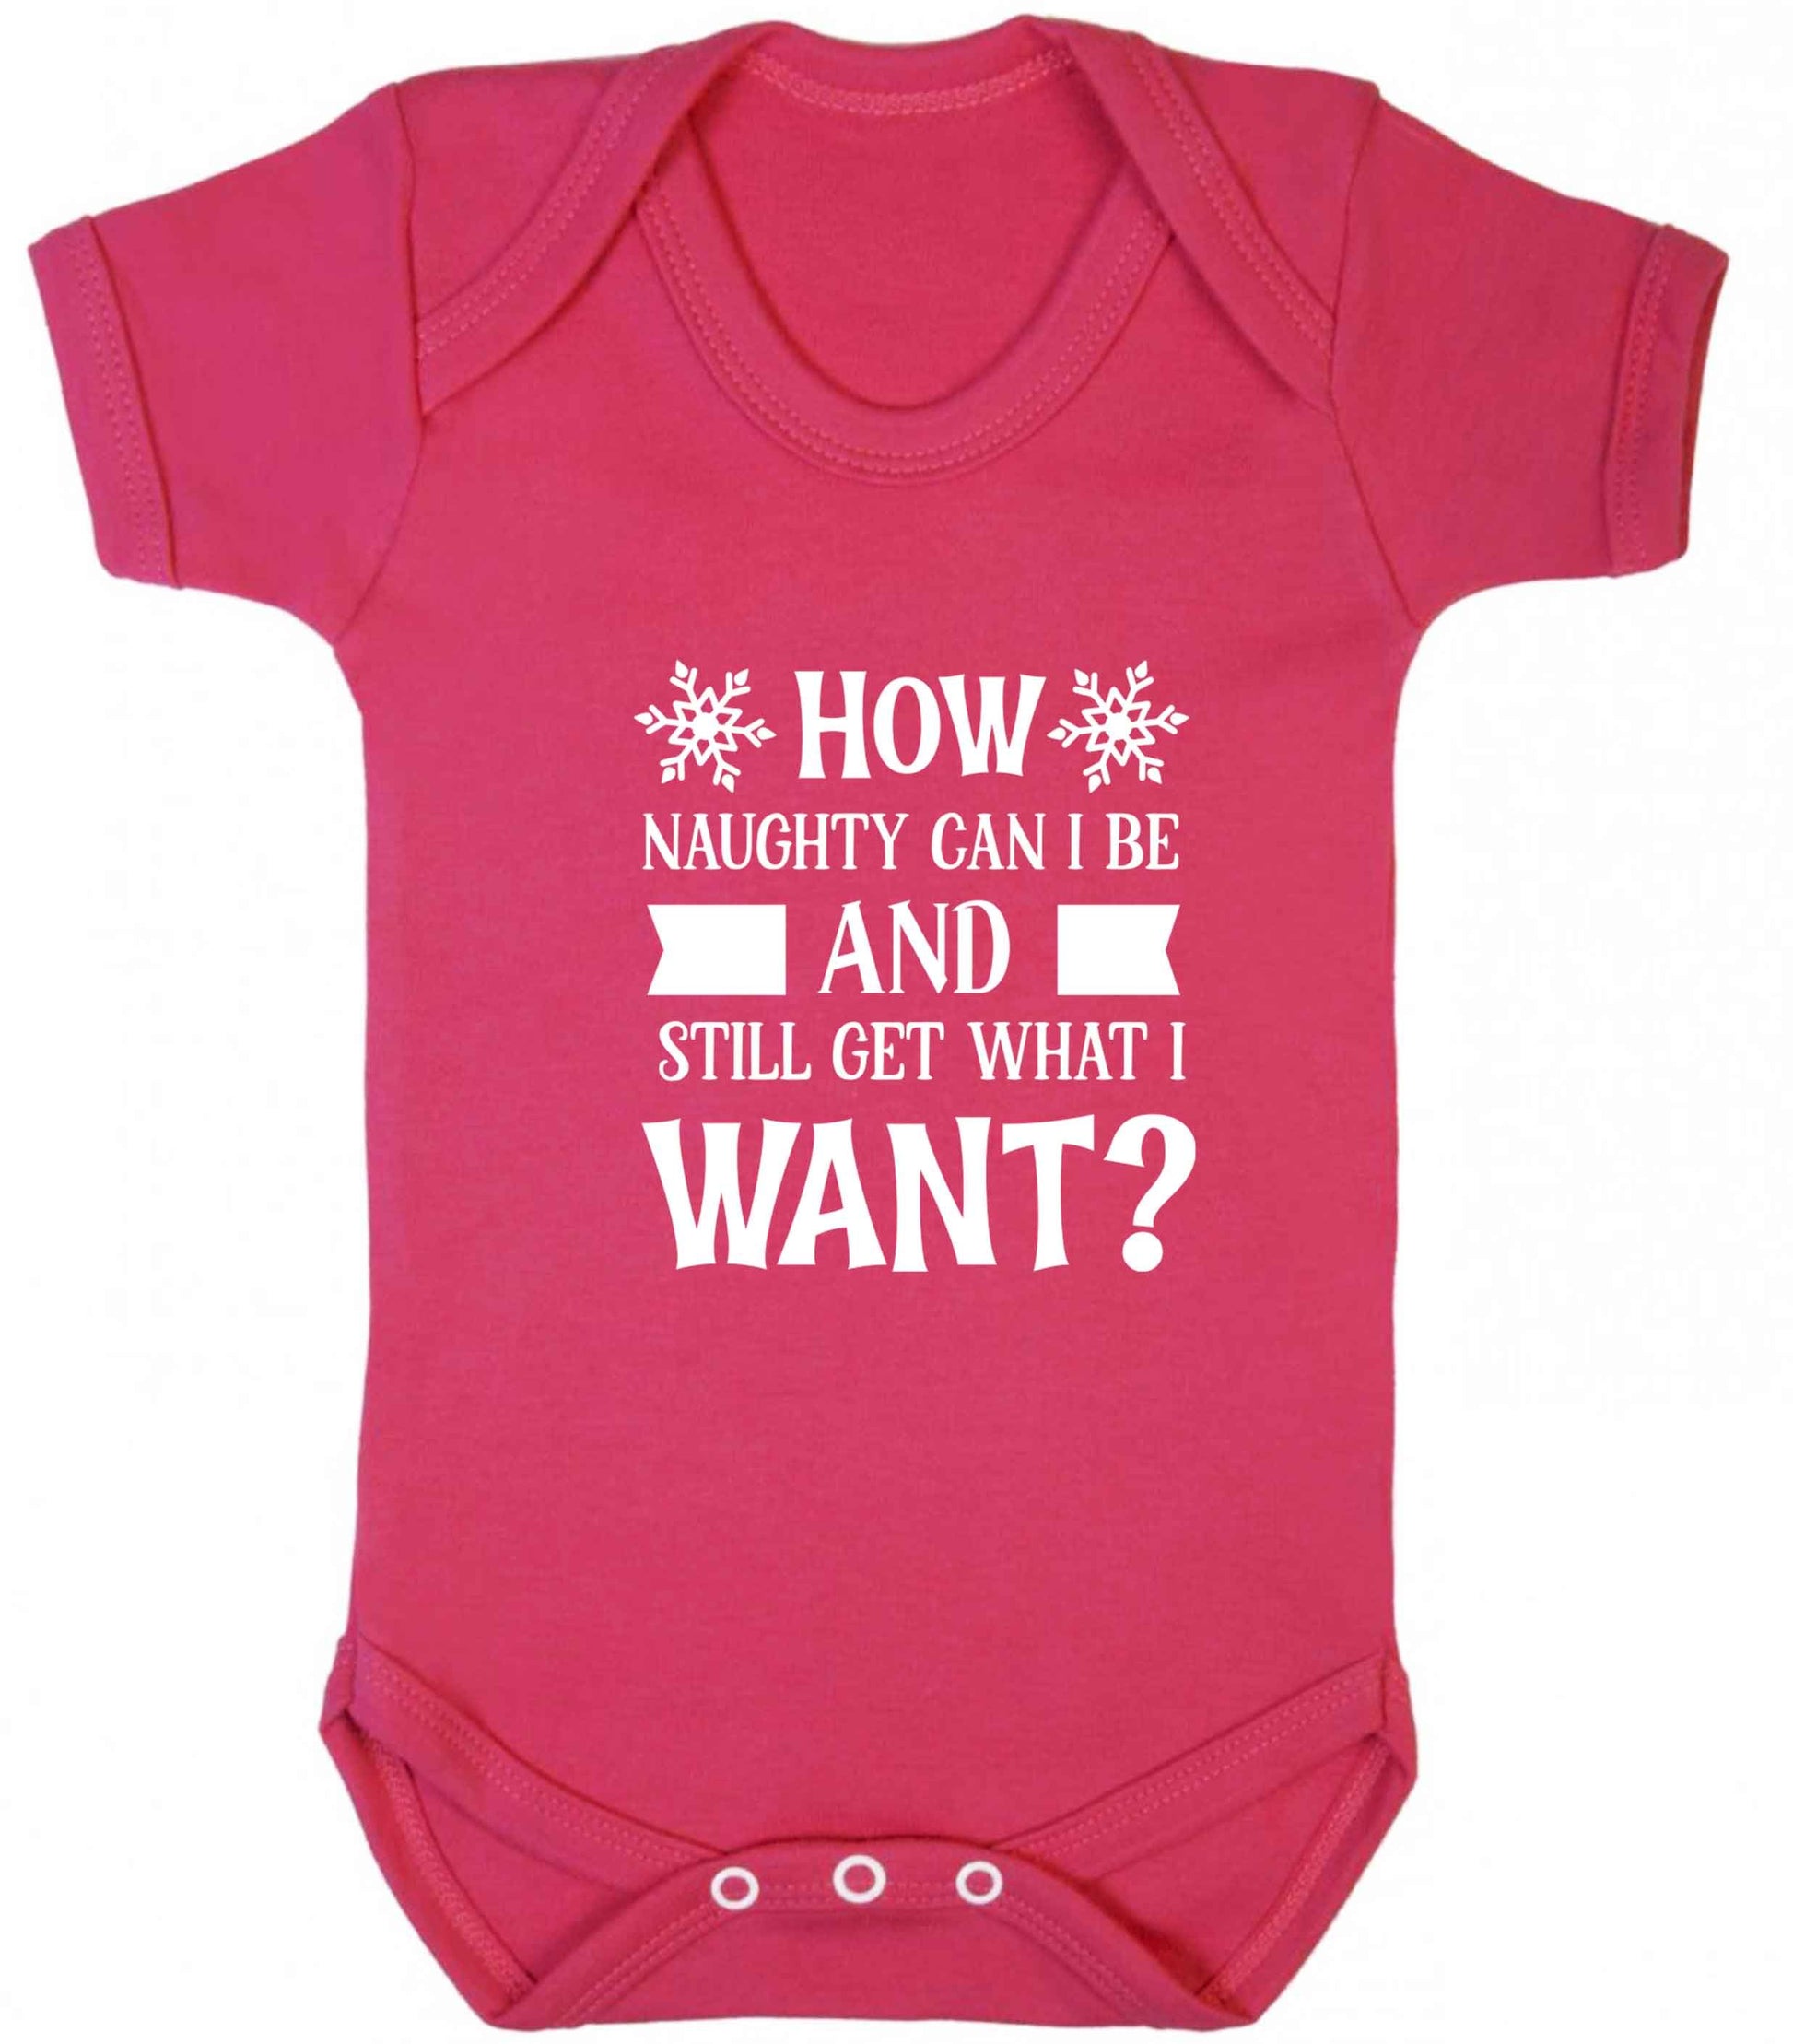 How naughty can I be and still get what I want? baby vest dark pink 18-24 months